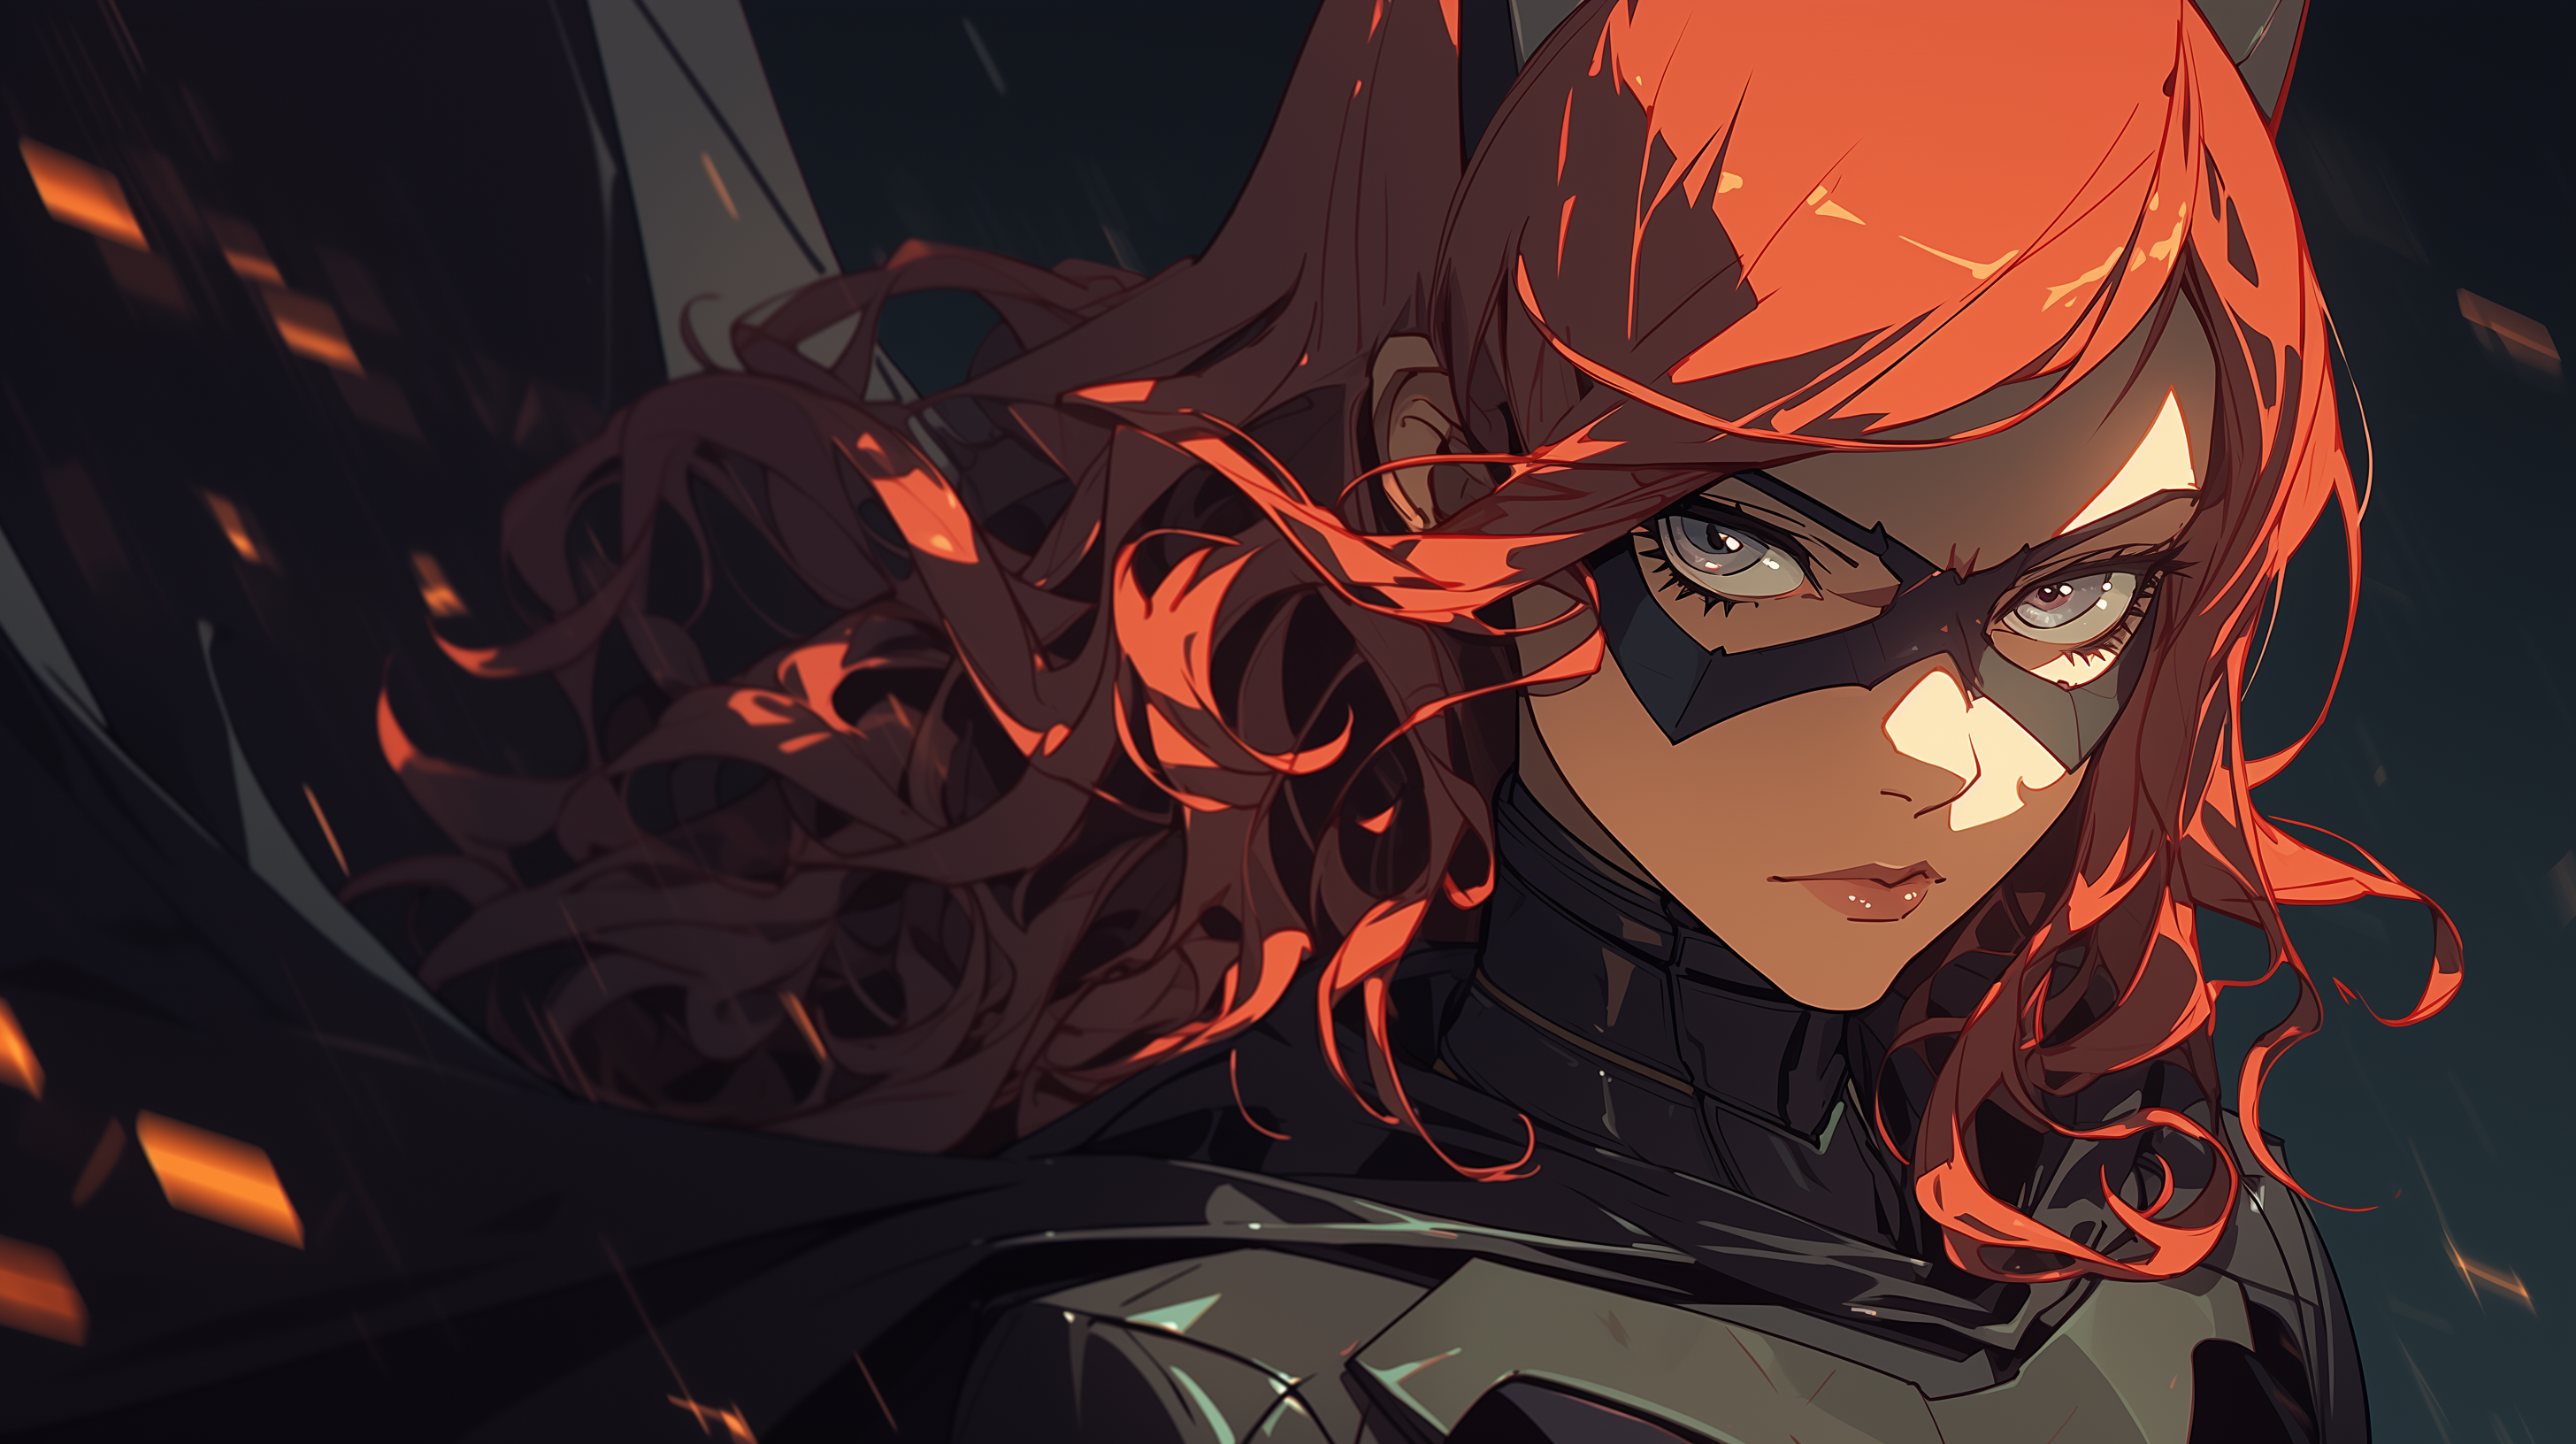 HD wallpaper featuring a dynamic illustration of Batgirl with flowing red hair and a determined expression, perfect for a superhero-themed desktop background.